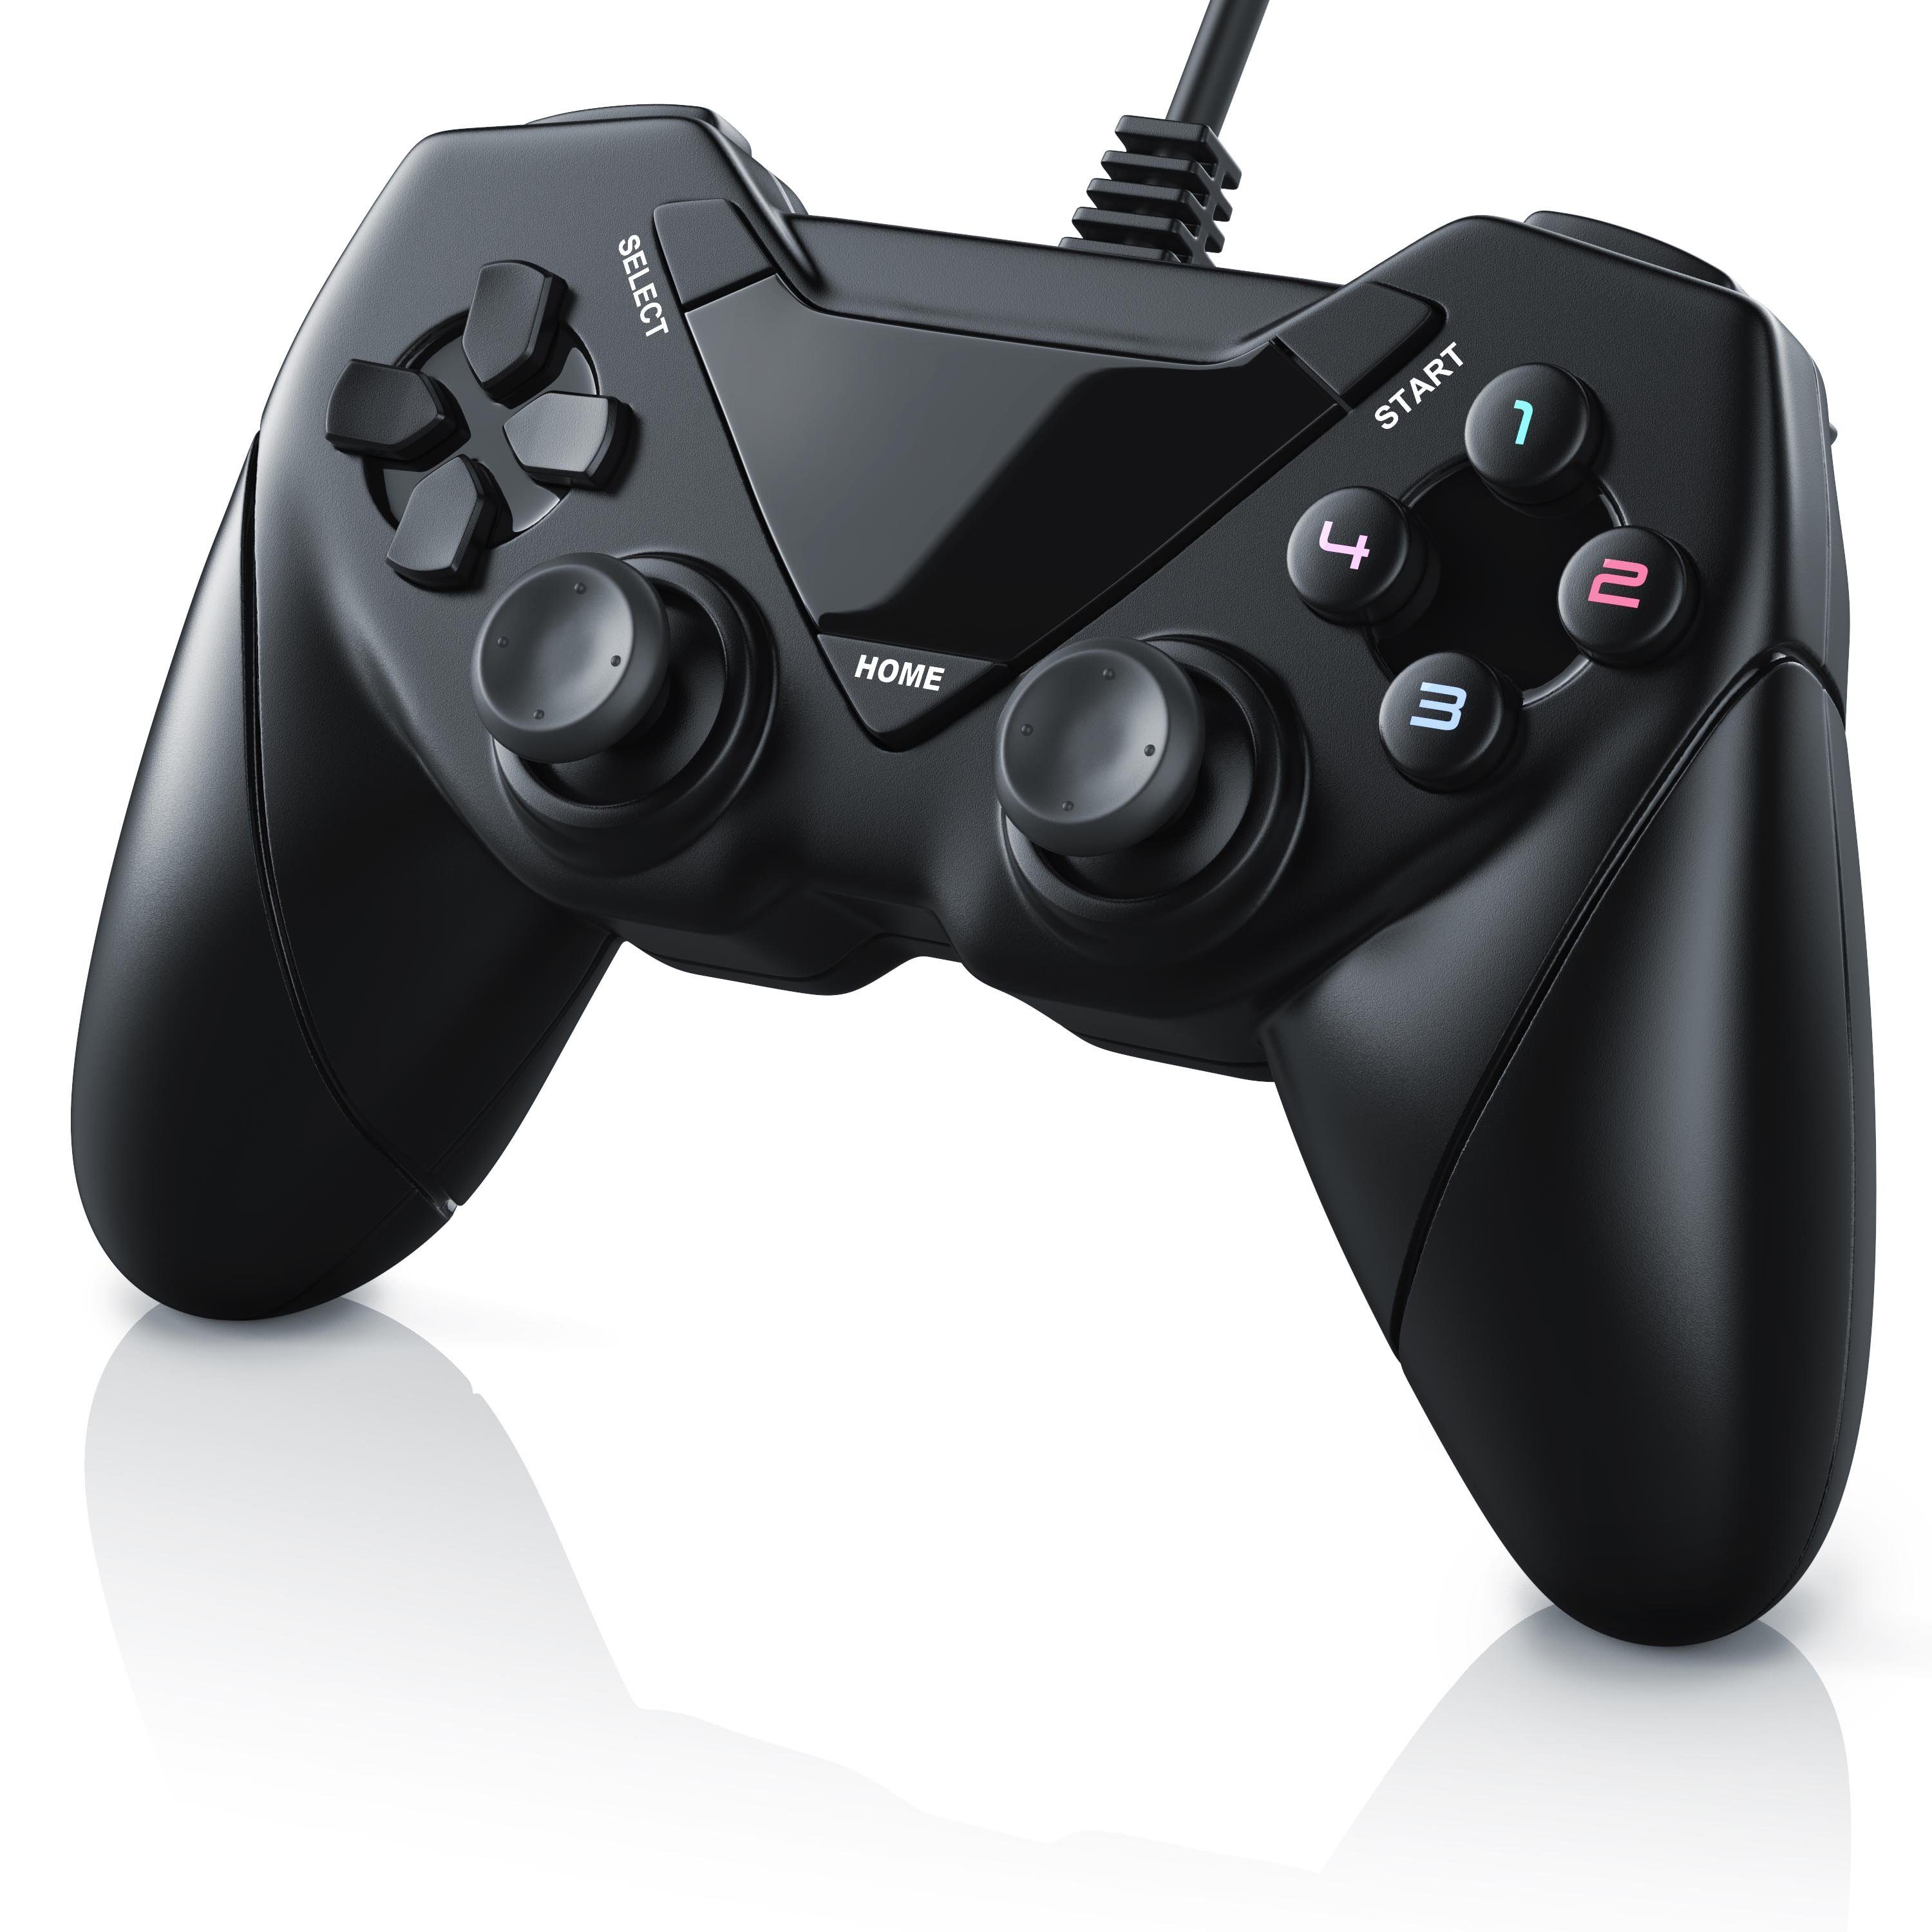 PlayStation-Controller X-Input) für PC St., Direct-Input / USB PS3 / Android, CSL / Controller (1